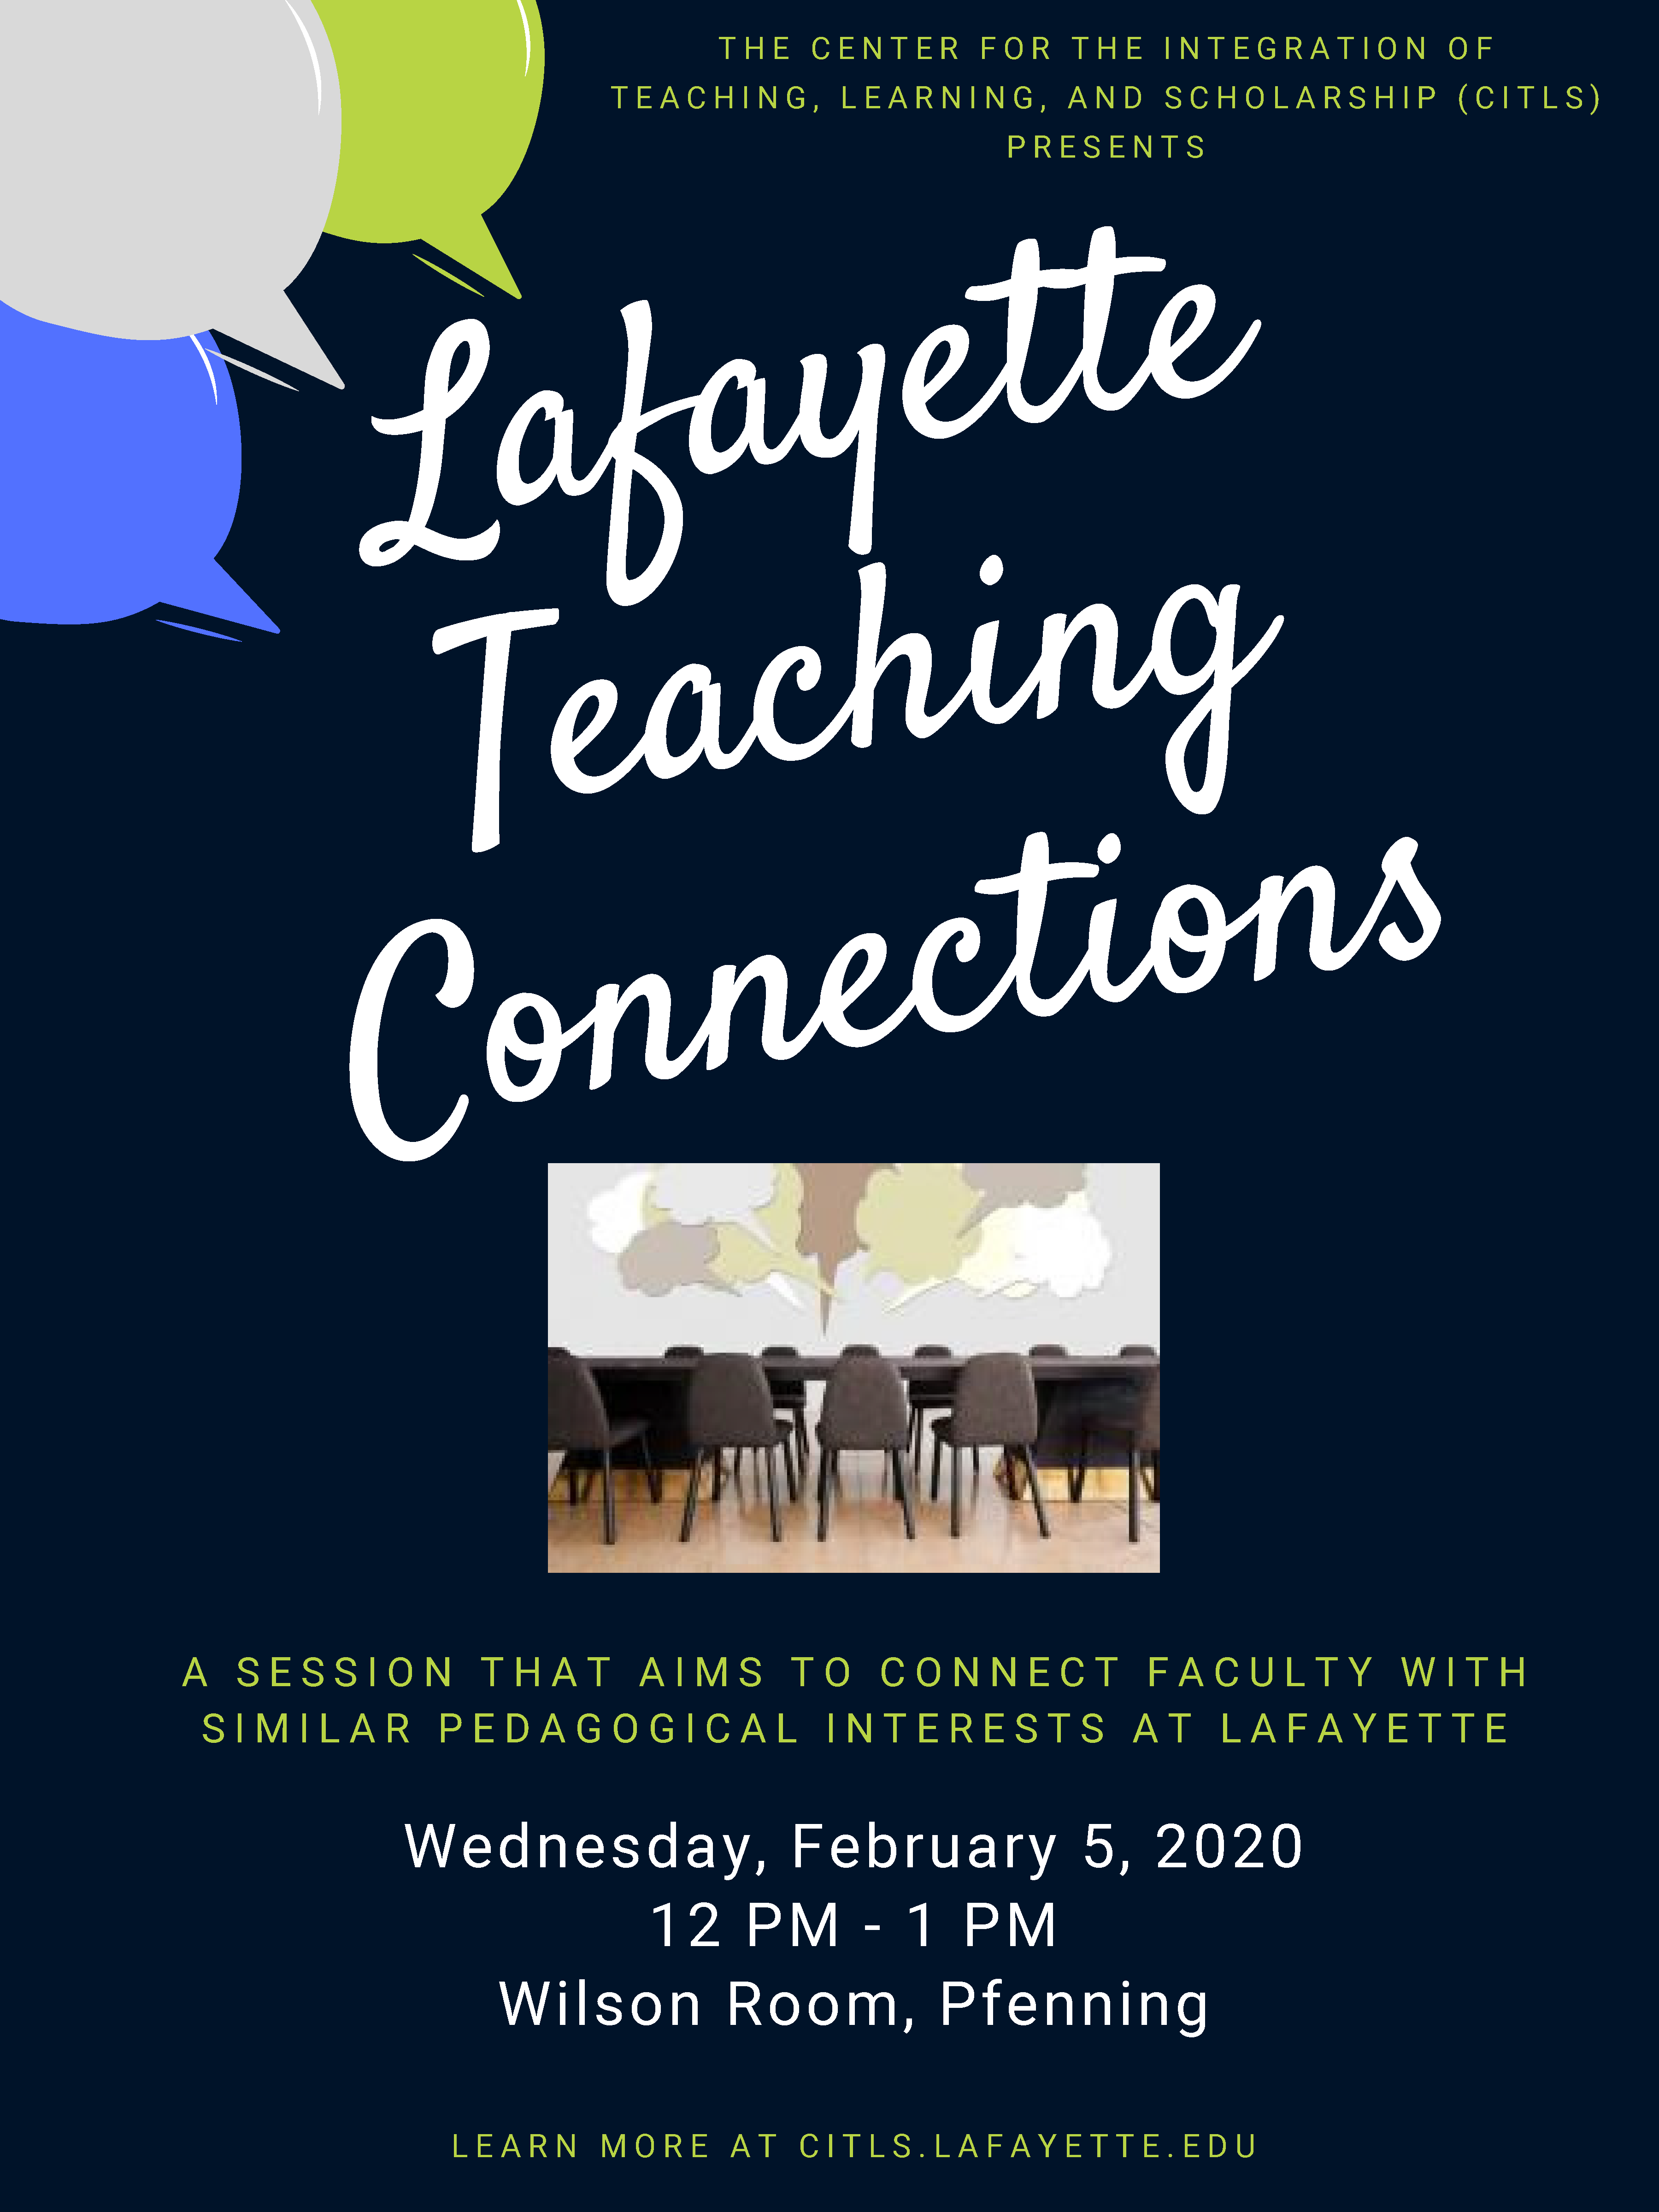 An event flyer with information about Lafayette Teaching Connections